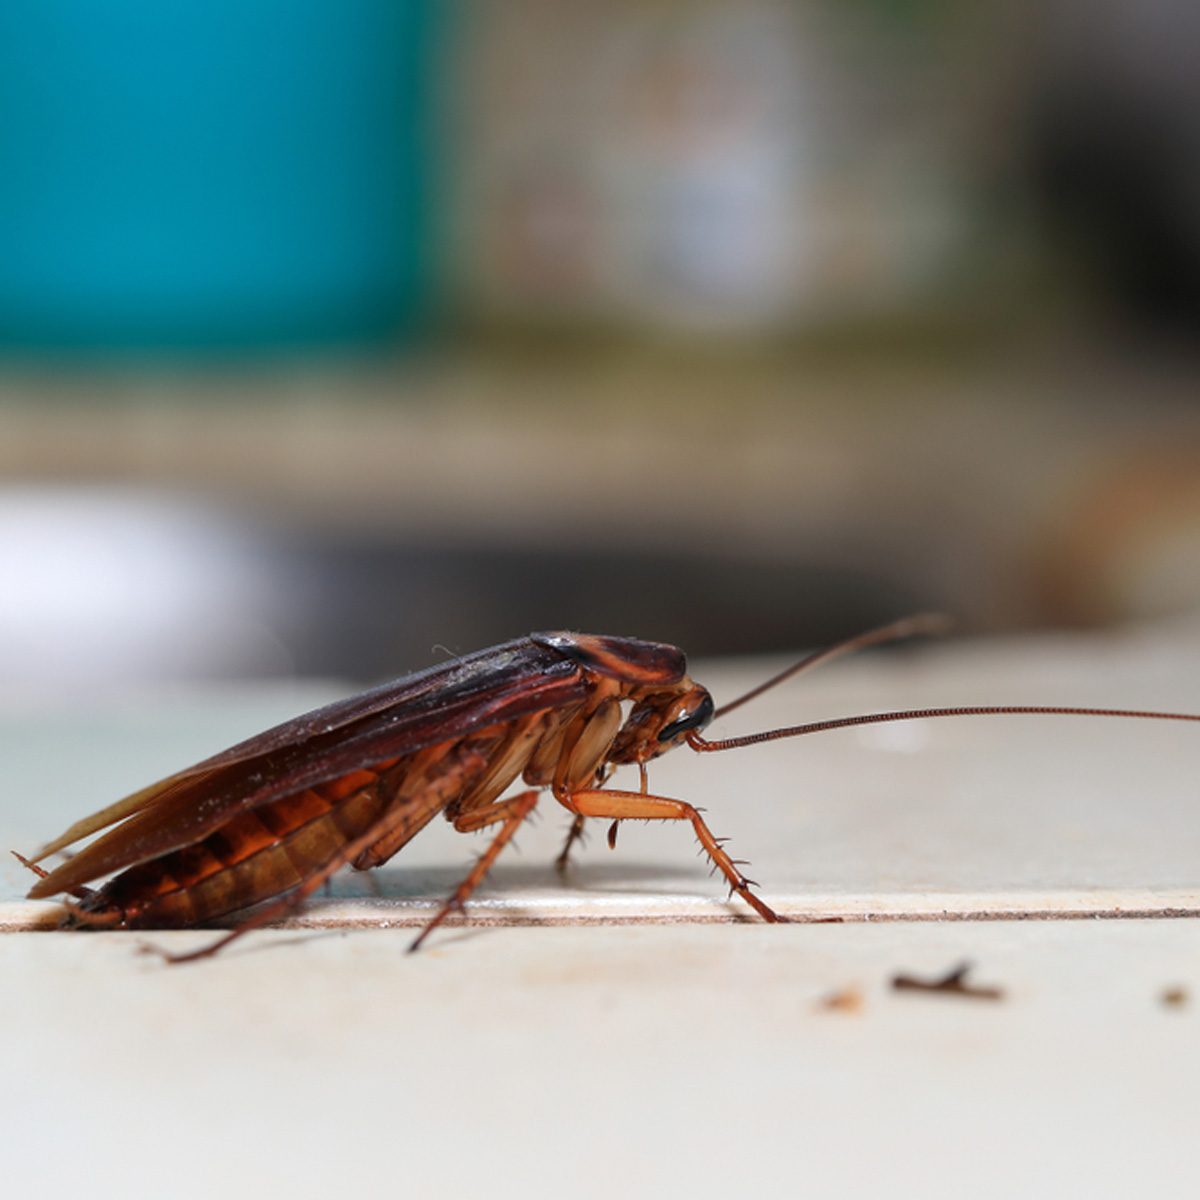 11 Effective and Safe Cockroach Killer Methods: A Guide